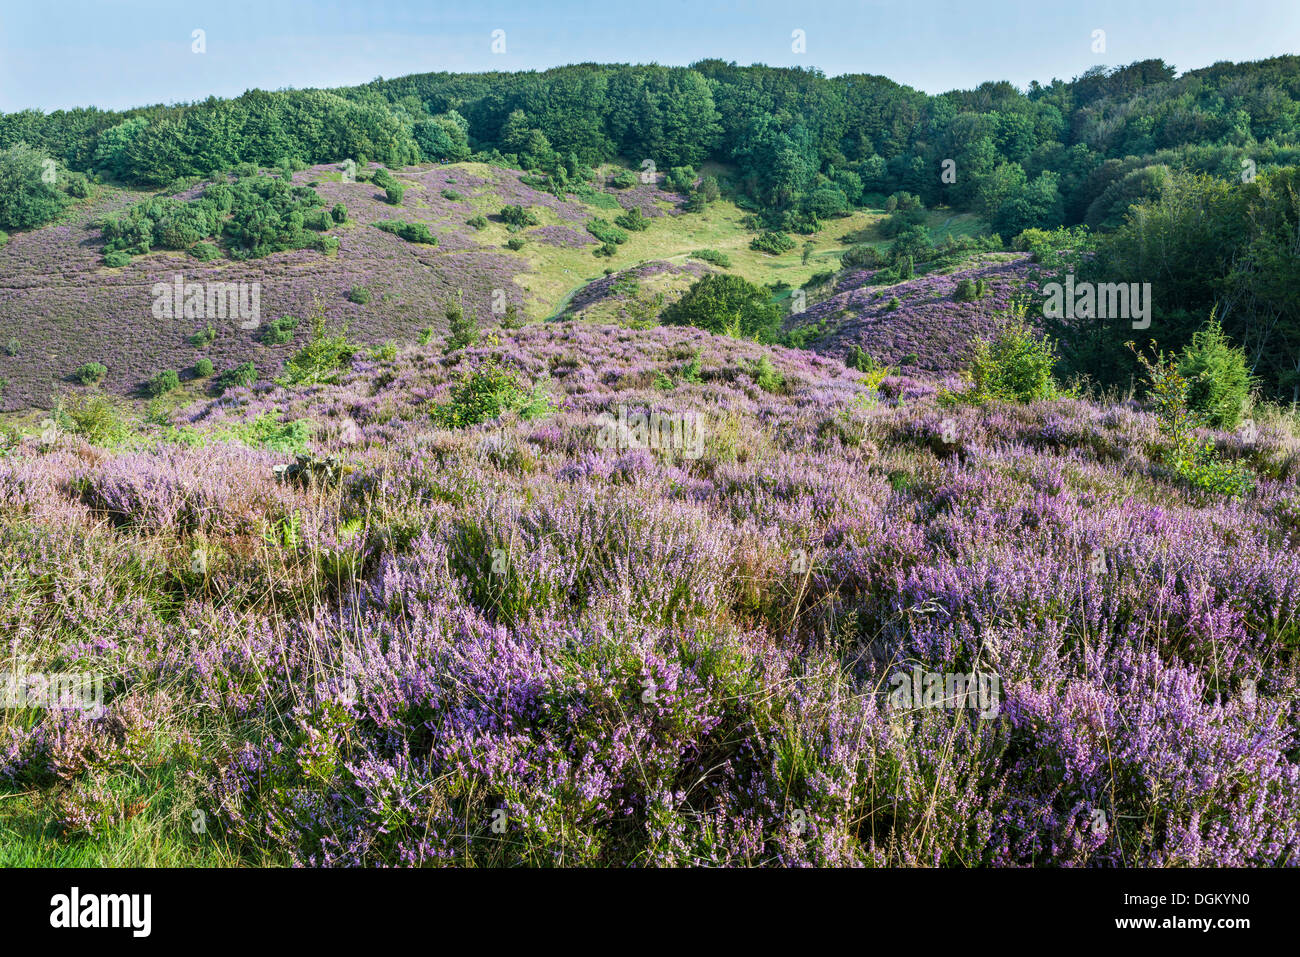 Danish Nature Reserves High Resolution Stock Photography and Images - Alamy